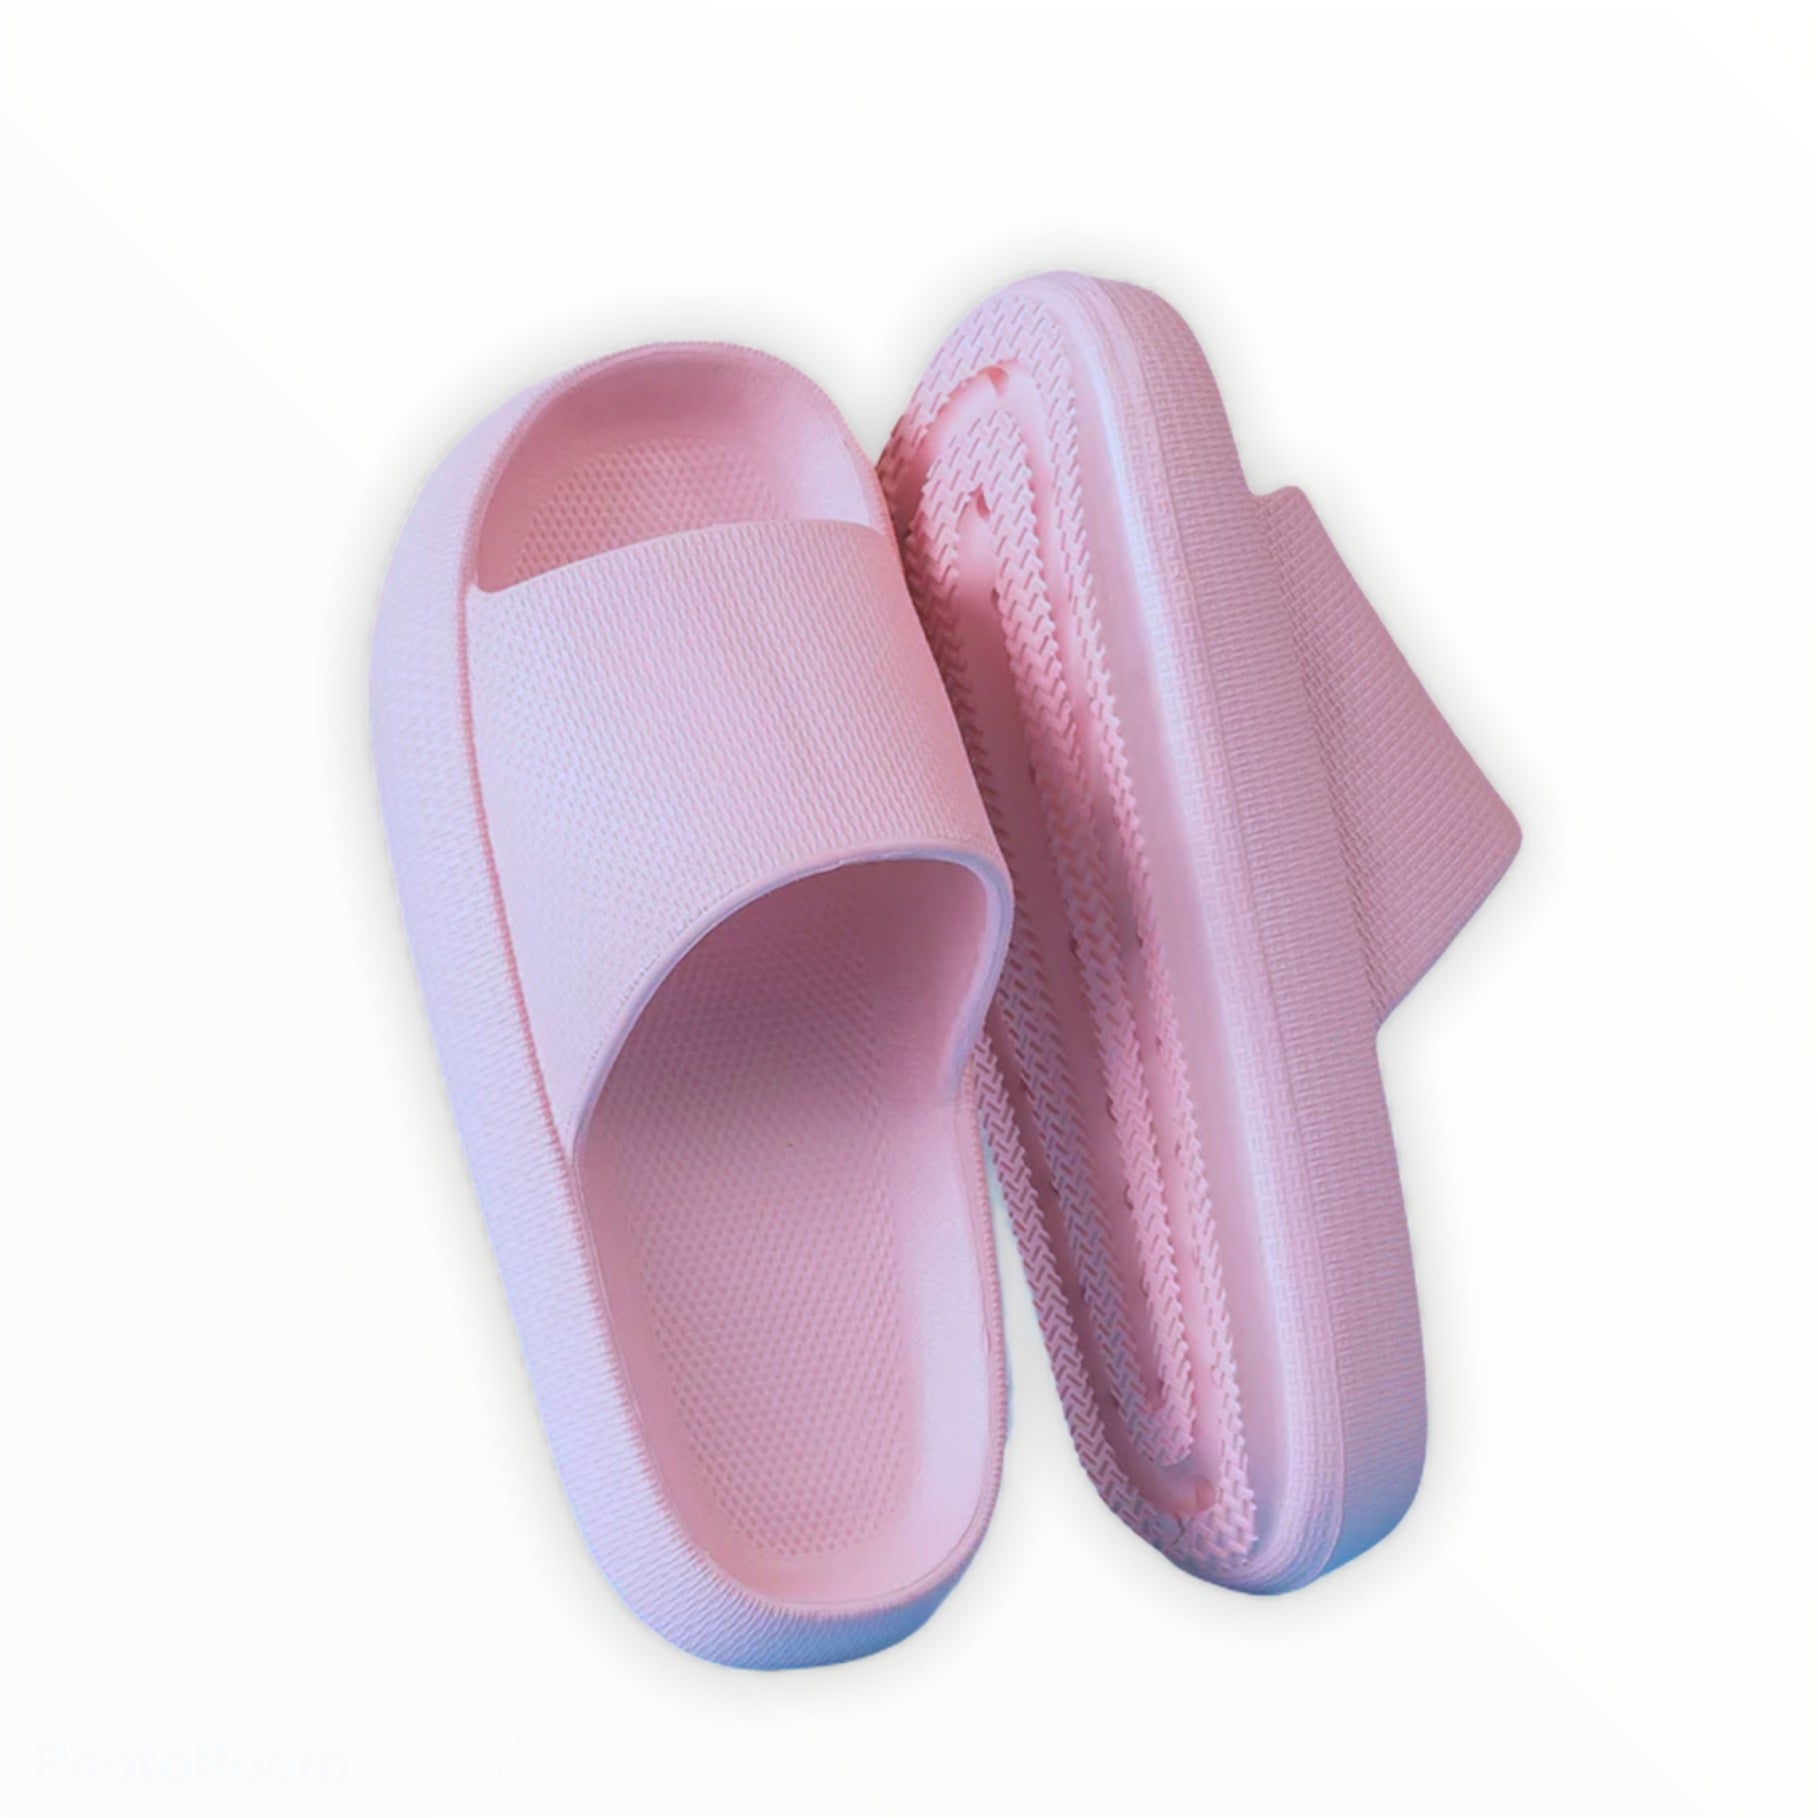 sootheze slippers, arch support slippers, anti-slip, washable sandals, hot girl fashion, summer beach sandals. 